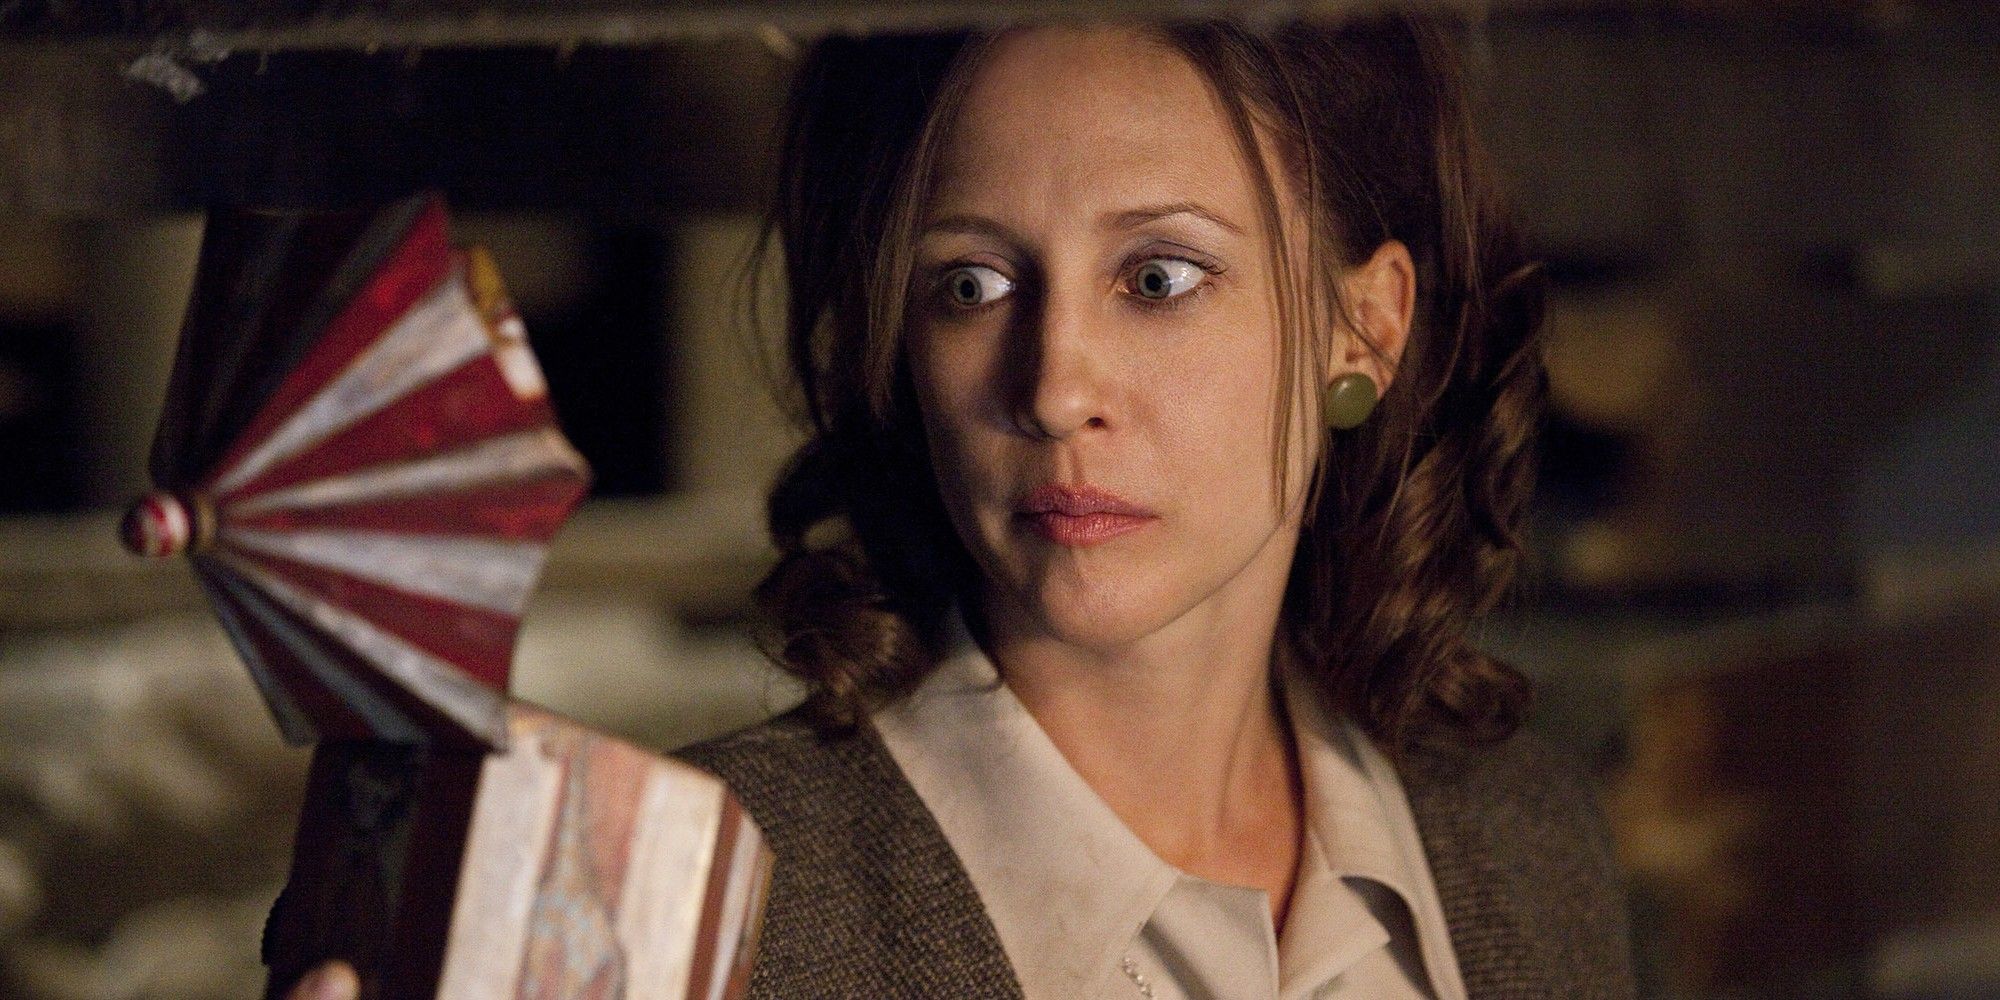 Lorraine holds a music box in The Conjuring (2013)